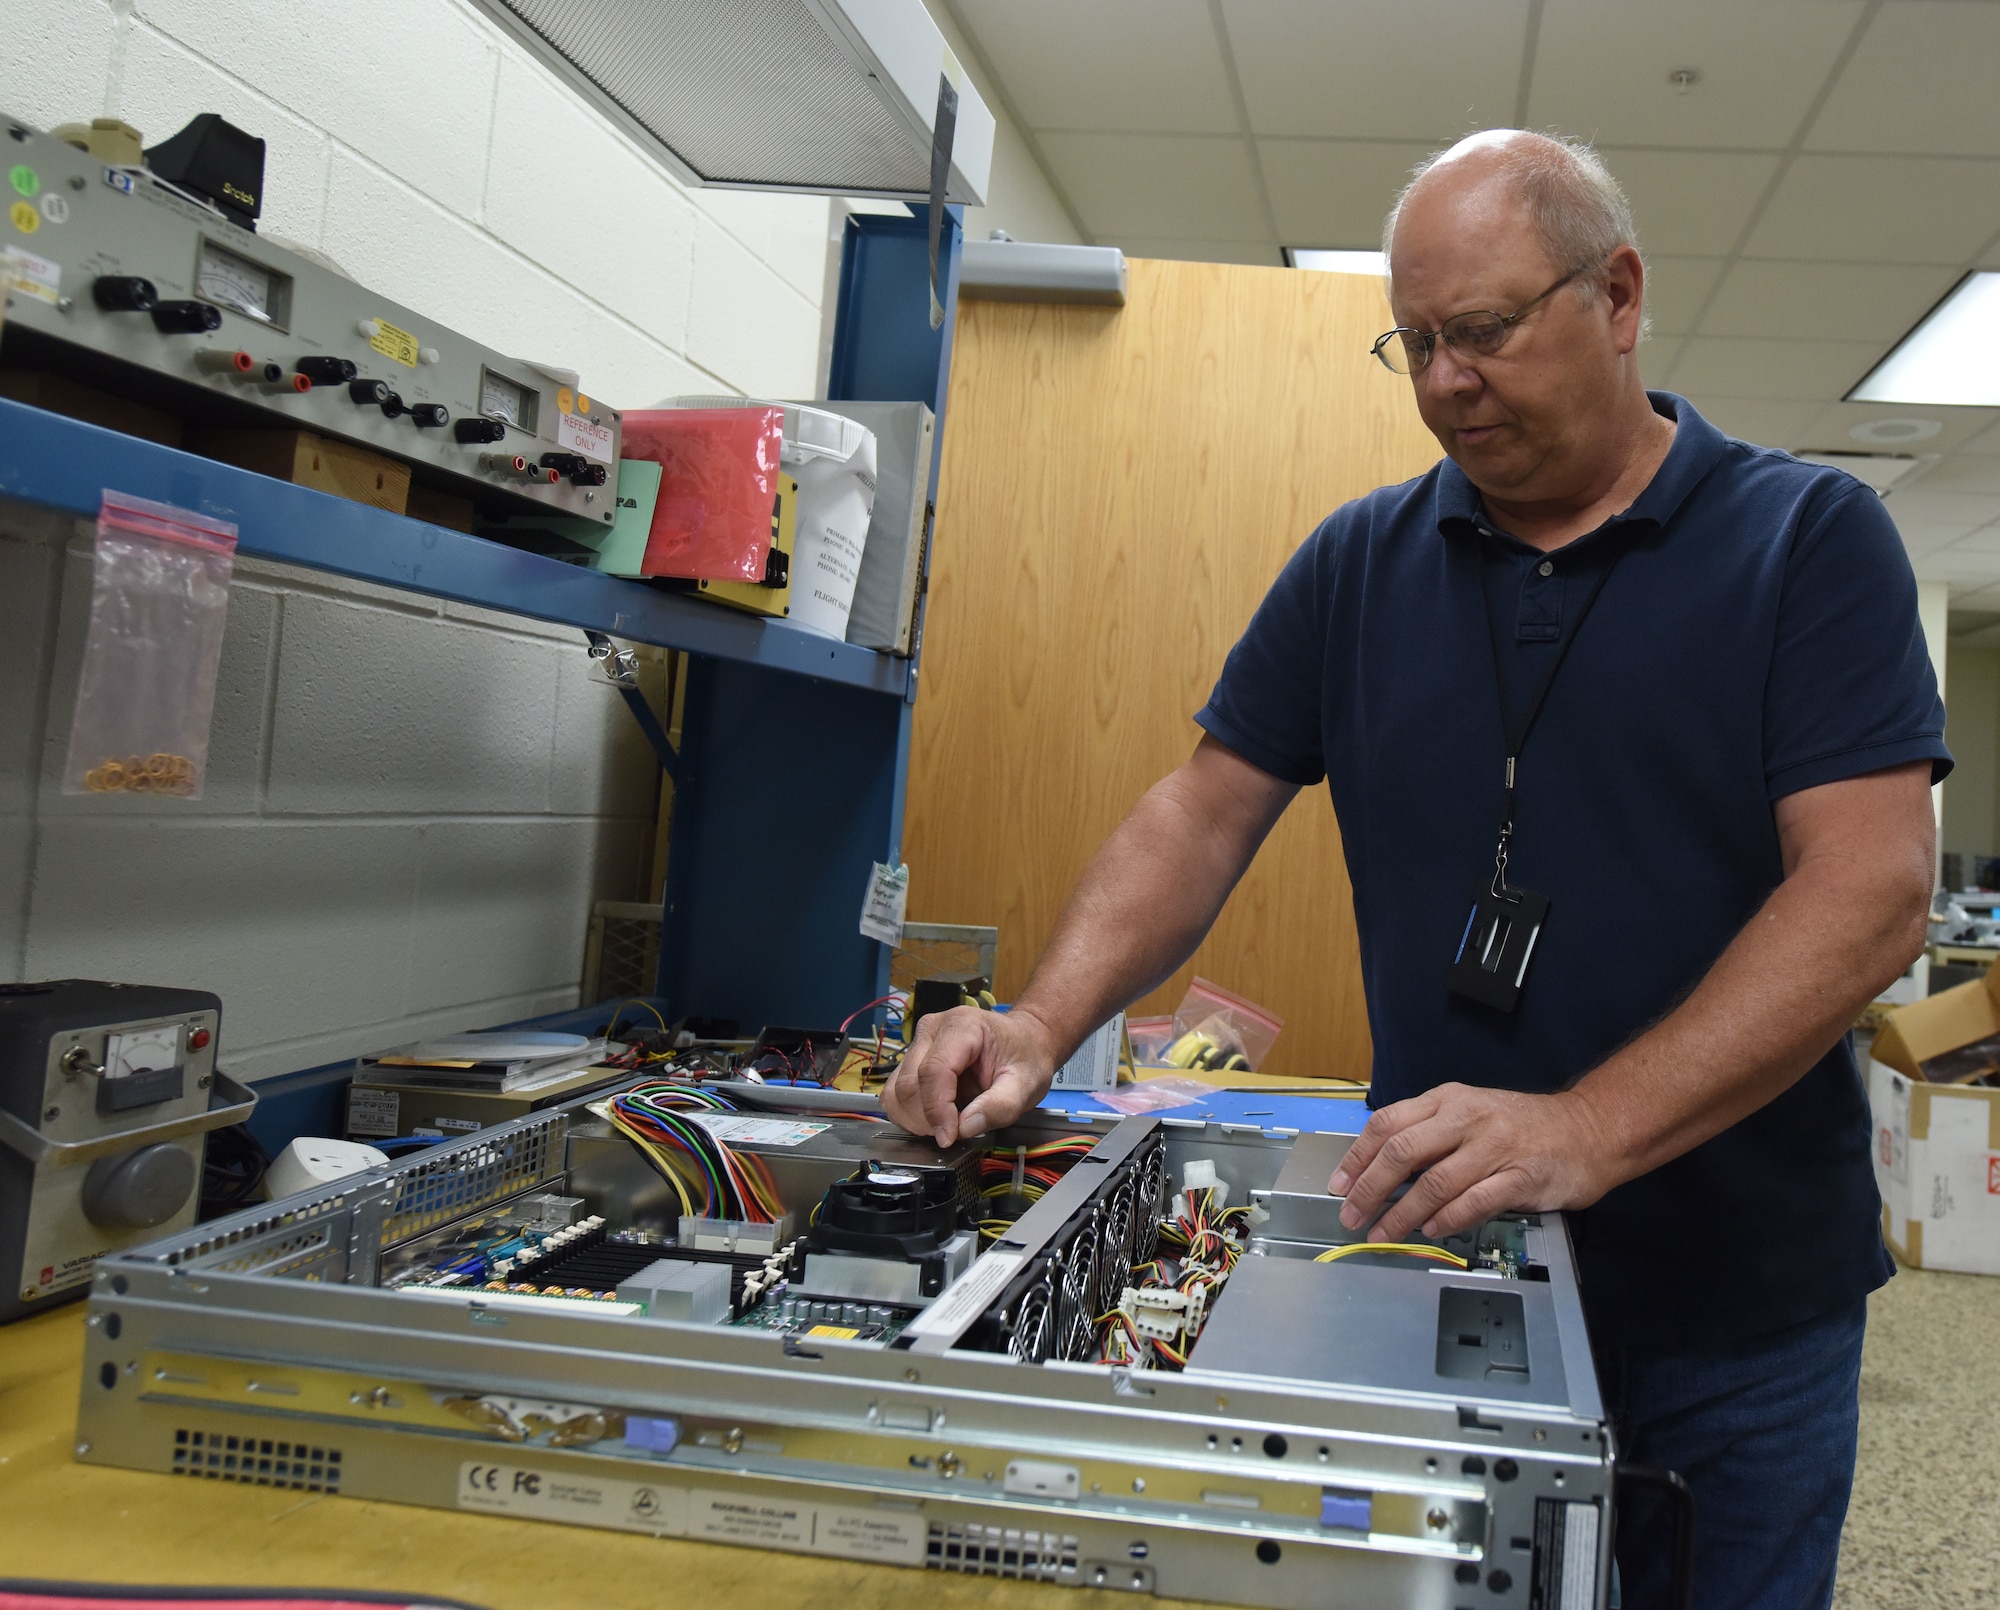 Randy Mack, a B-1 simulator maintenance technician, works on a piece of computer equipment at Ellsworth Air Force Base, S.D., Aug. 21, 2018. The B-1 simulator is a state-of-the-art facility, which is powered by multiple computers so it can display images and allow aircrew members to complete realistic training scenarios. (U.S. Air Force photo by Airman 1st Class Thomas Karol)